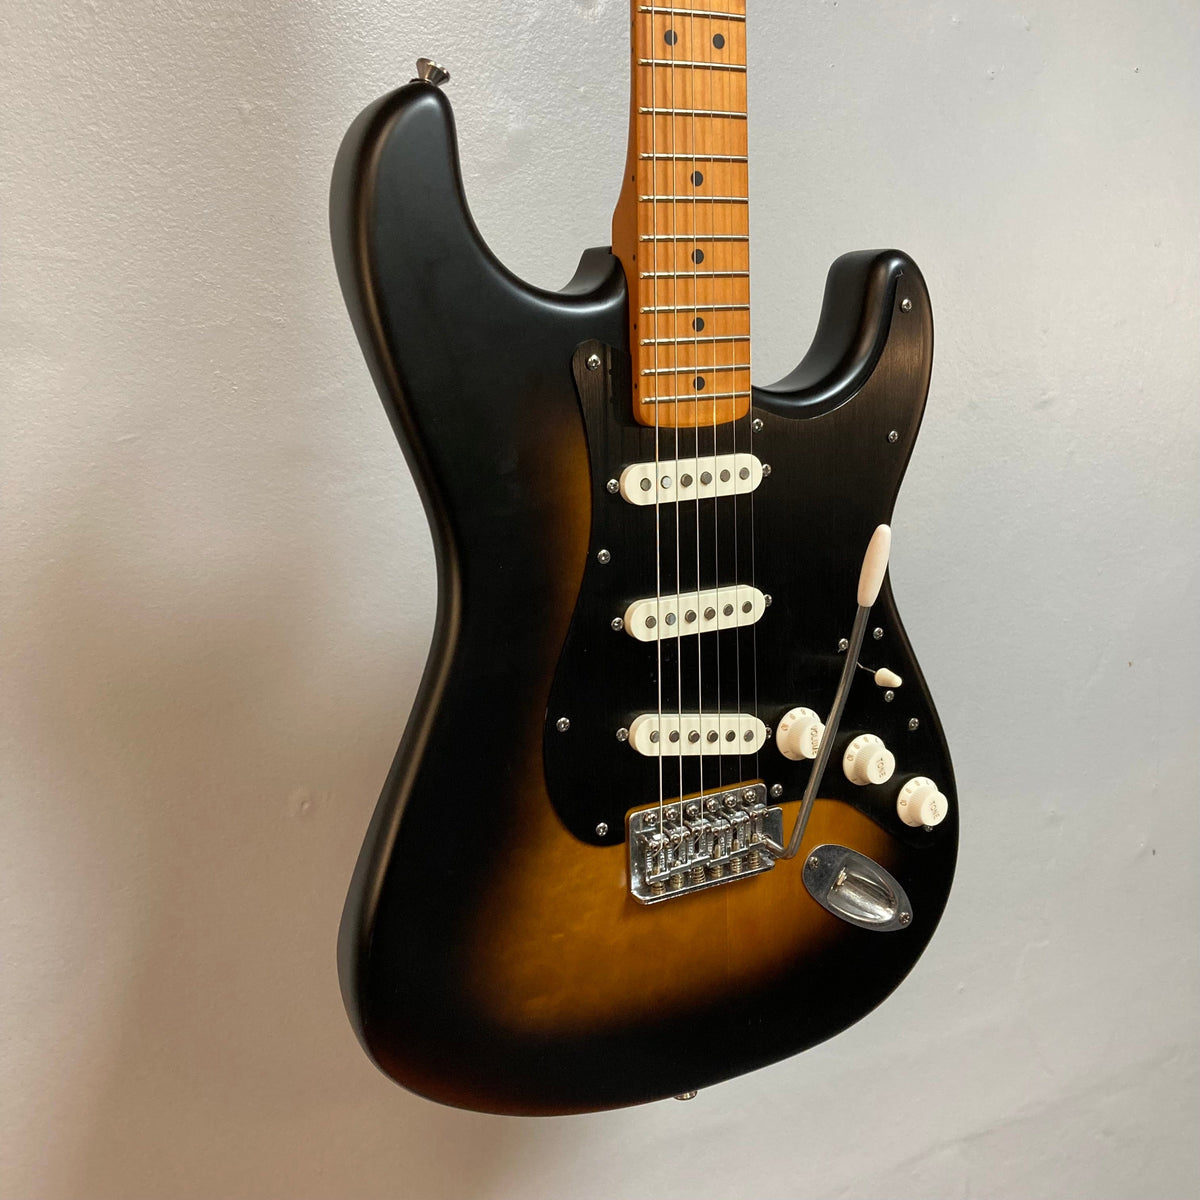 Squier 40th Anniversary Stratocaster Vintage Edition...